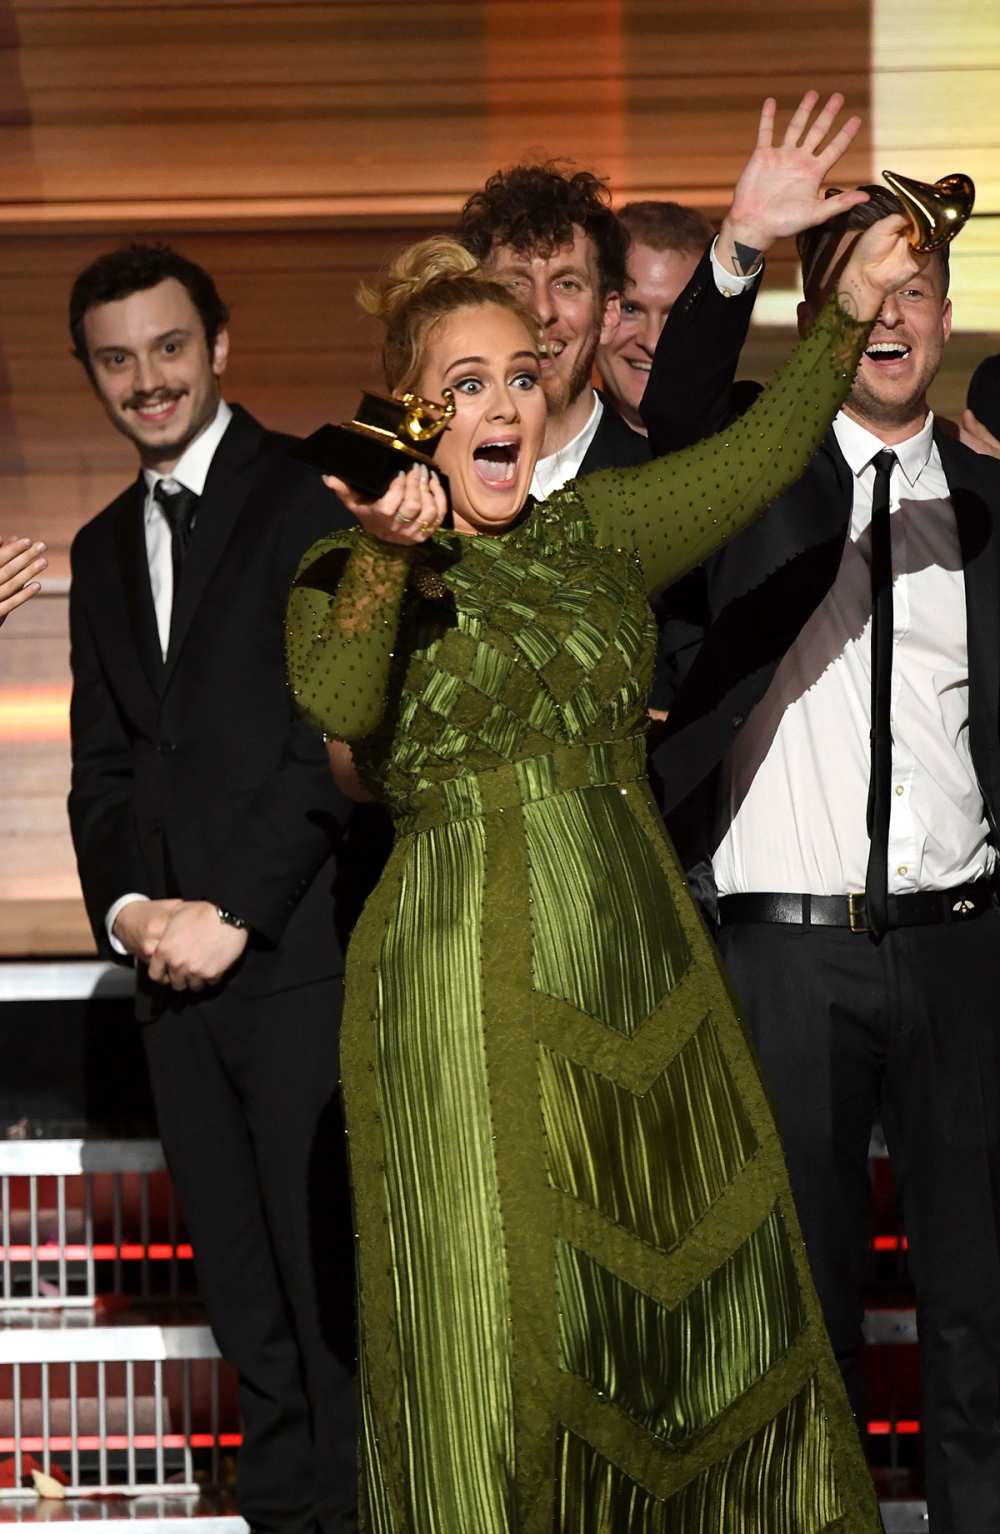 Adele breaks her Grammy in half at the 2017 awards show.